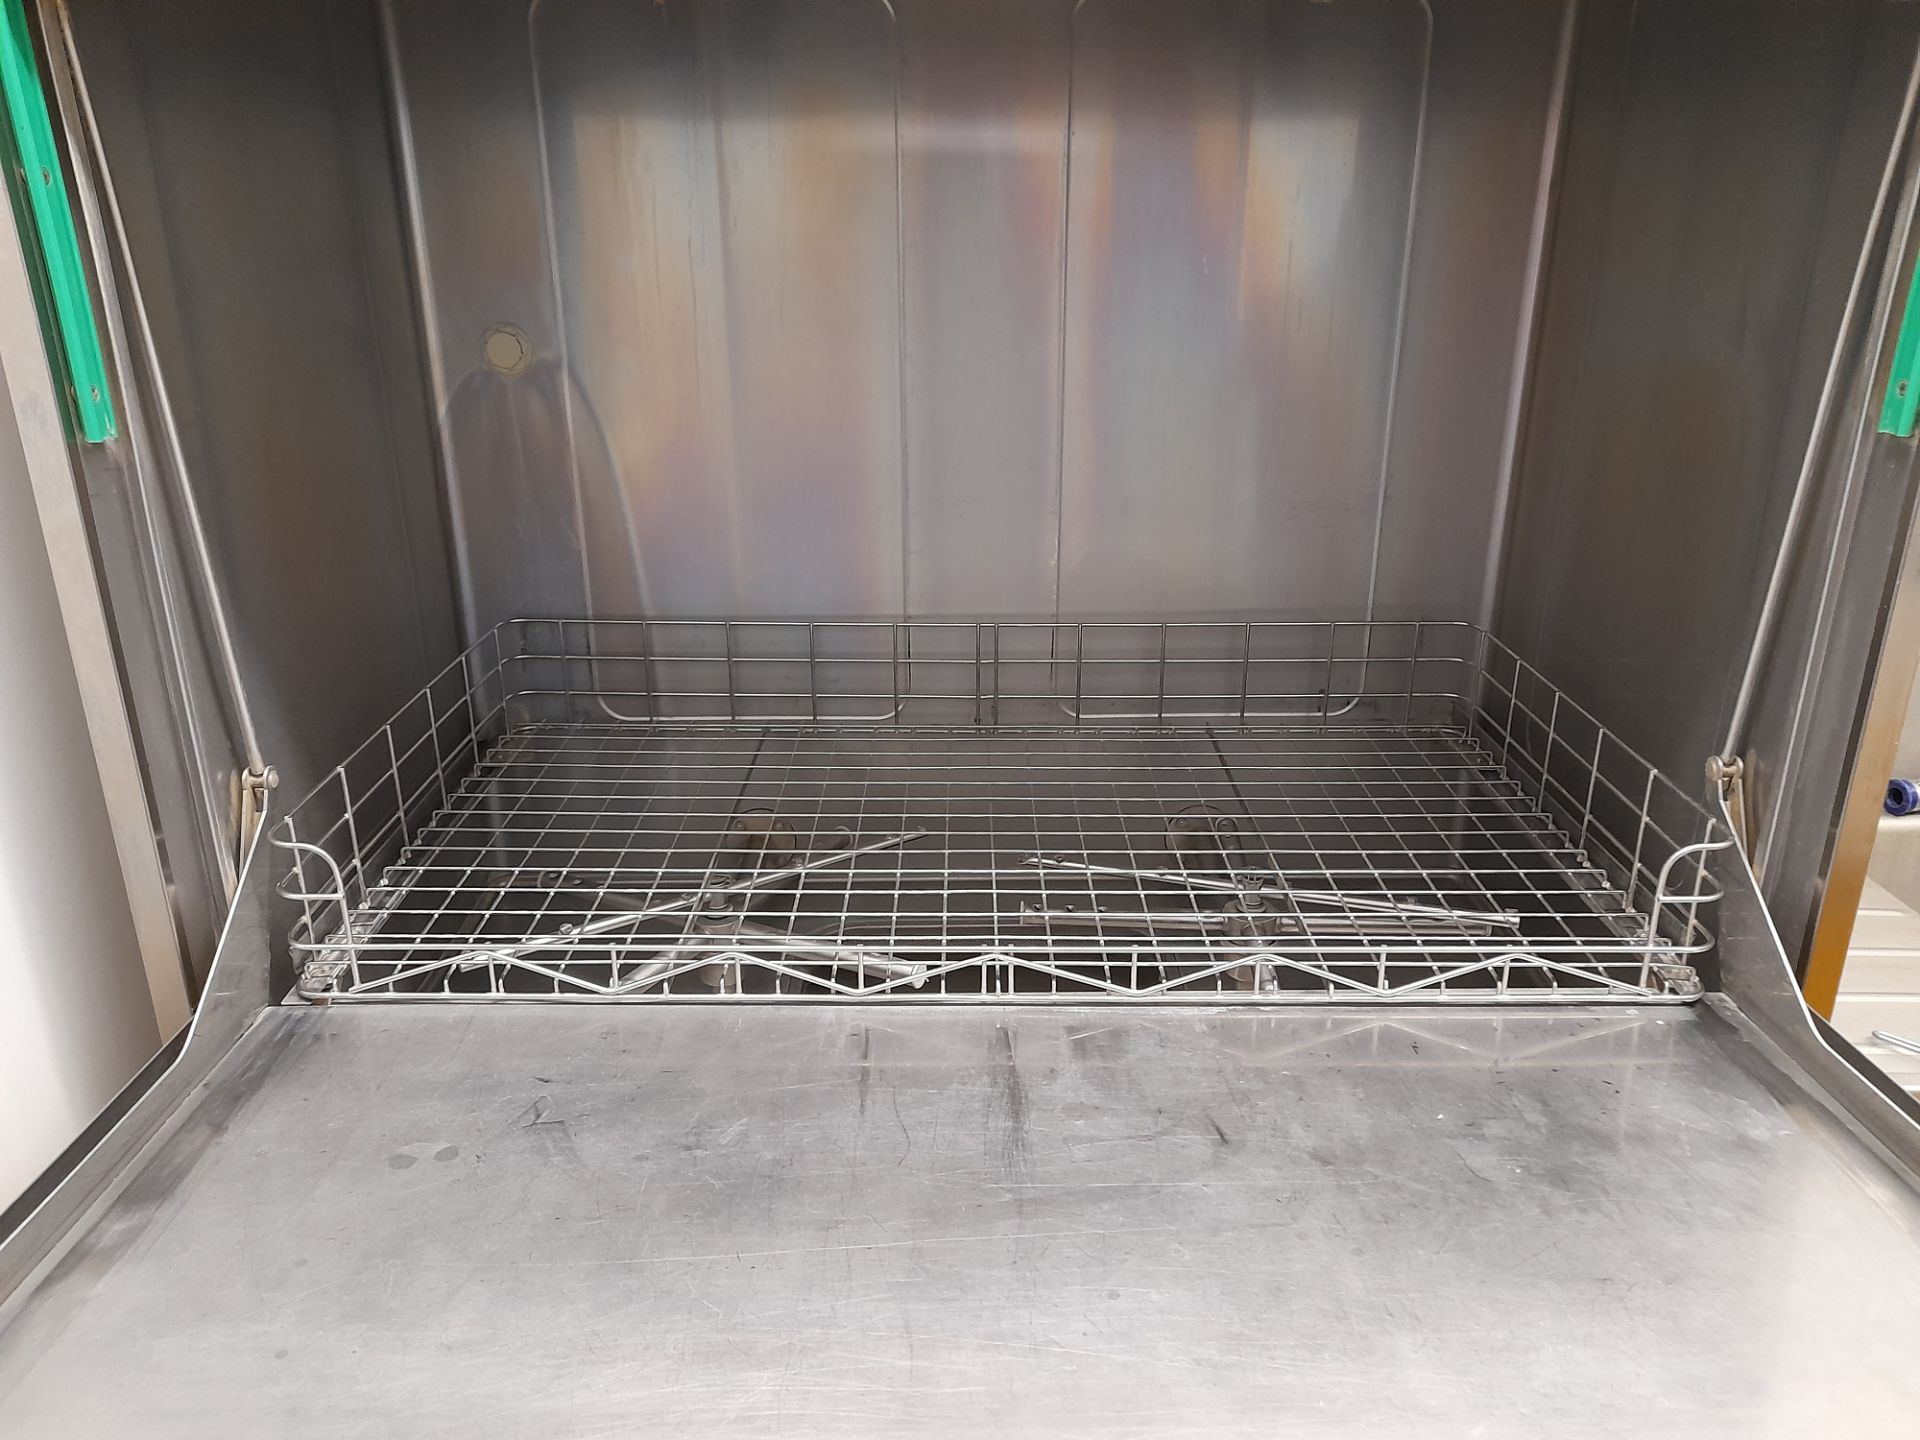 Comenda GE1005H RCD Stainless Steel Commercial Dishwasher, Serial Number GQ0012330117, with - Image 5 of 6